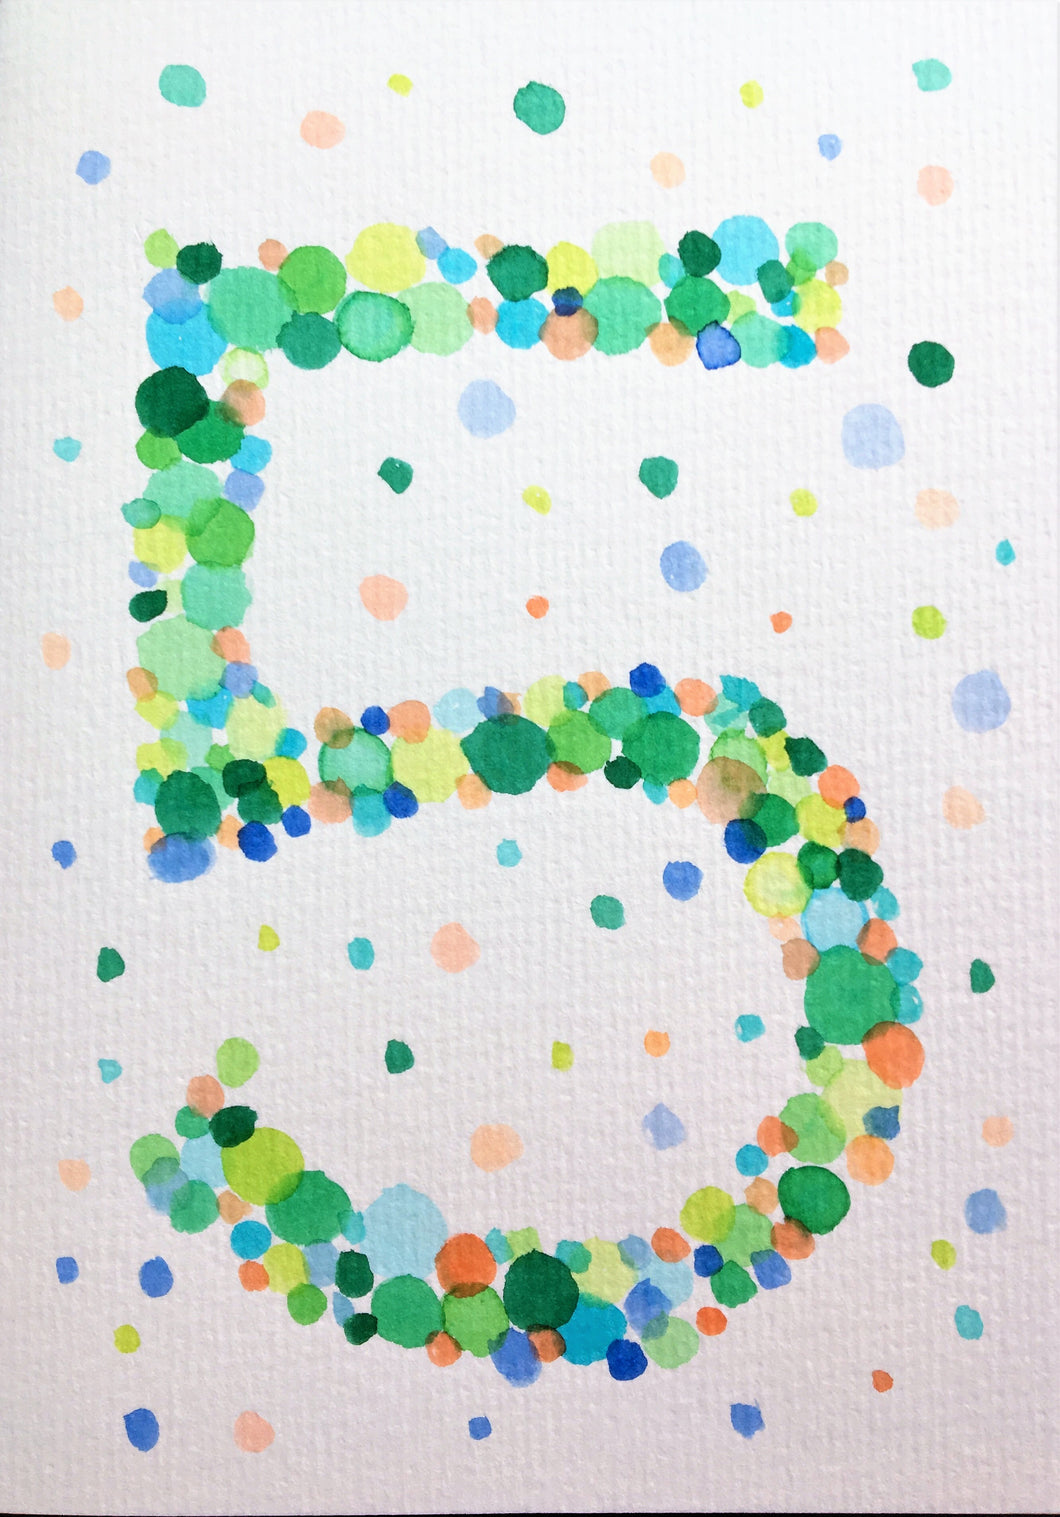 Hand-painted greeting card - 5th Birthday - Green, orange, yellow, turquoise bubbles - eDgE dEsiGn London